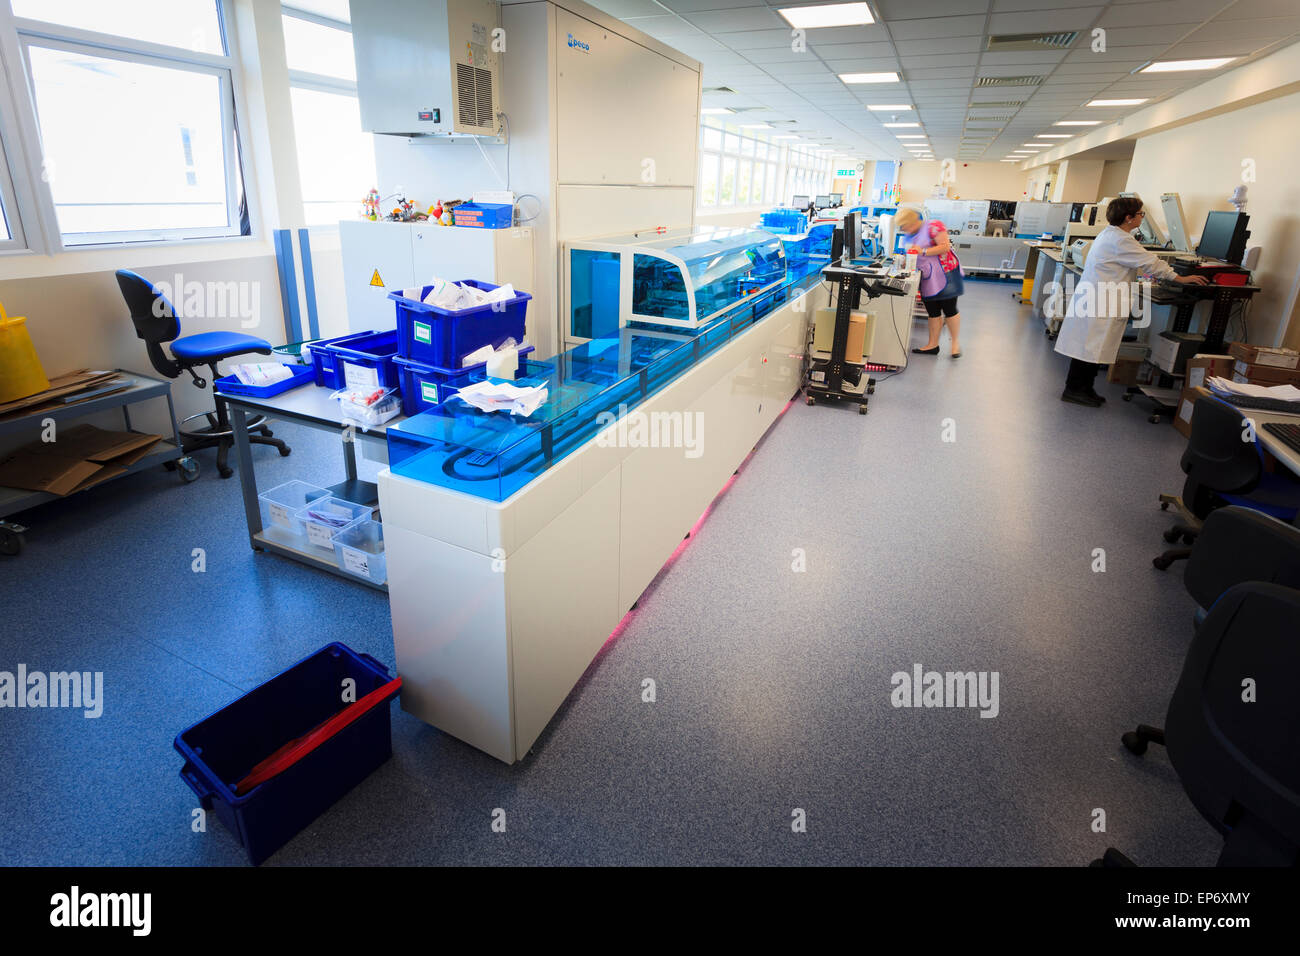 blood sciences automated analysis machine in hospital Stock Photo